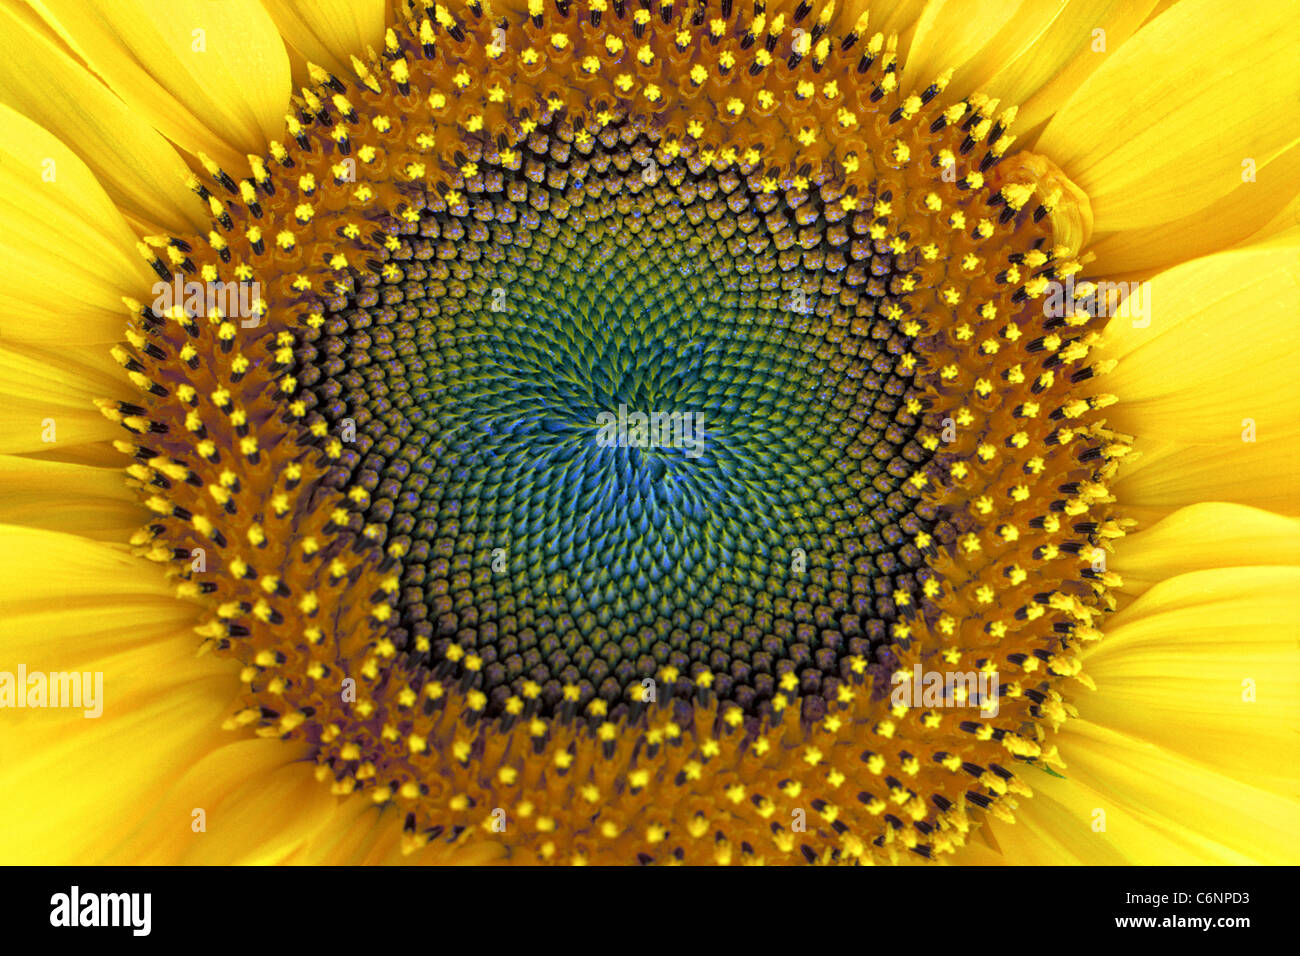 This close-up of the large head of the Sunflower shows the tiny yellow flowers that encircle green unripe seeds in the center of this food plant. Stock Photo